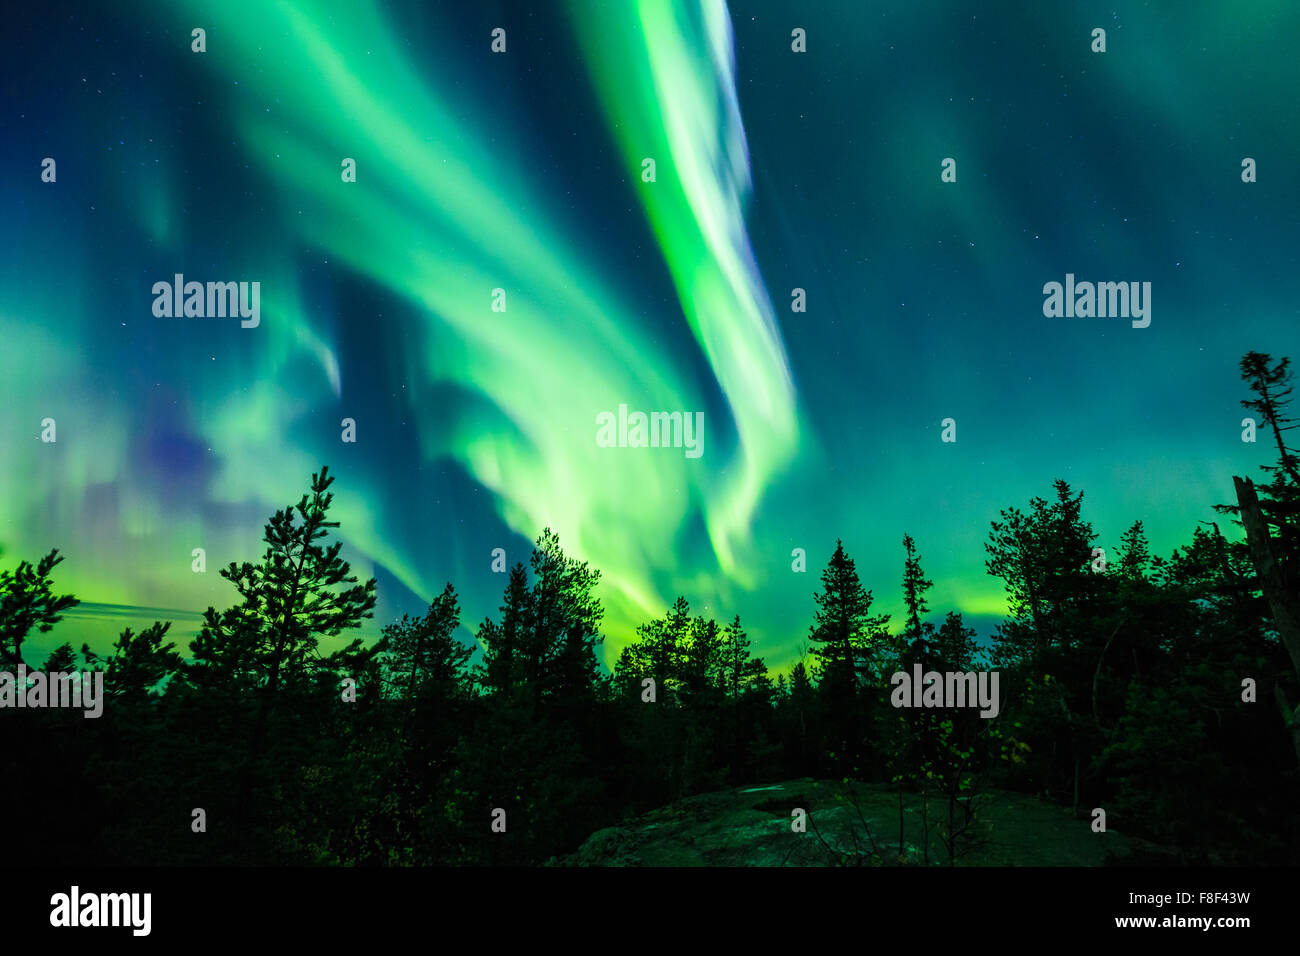 Colorful Northern lights (Aurora borealis) in the sky Stock Photo